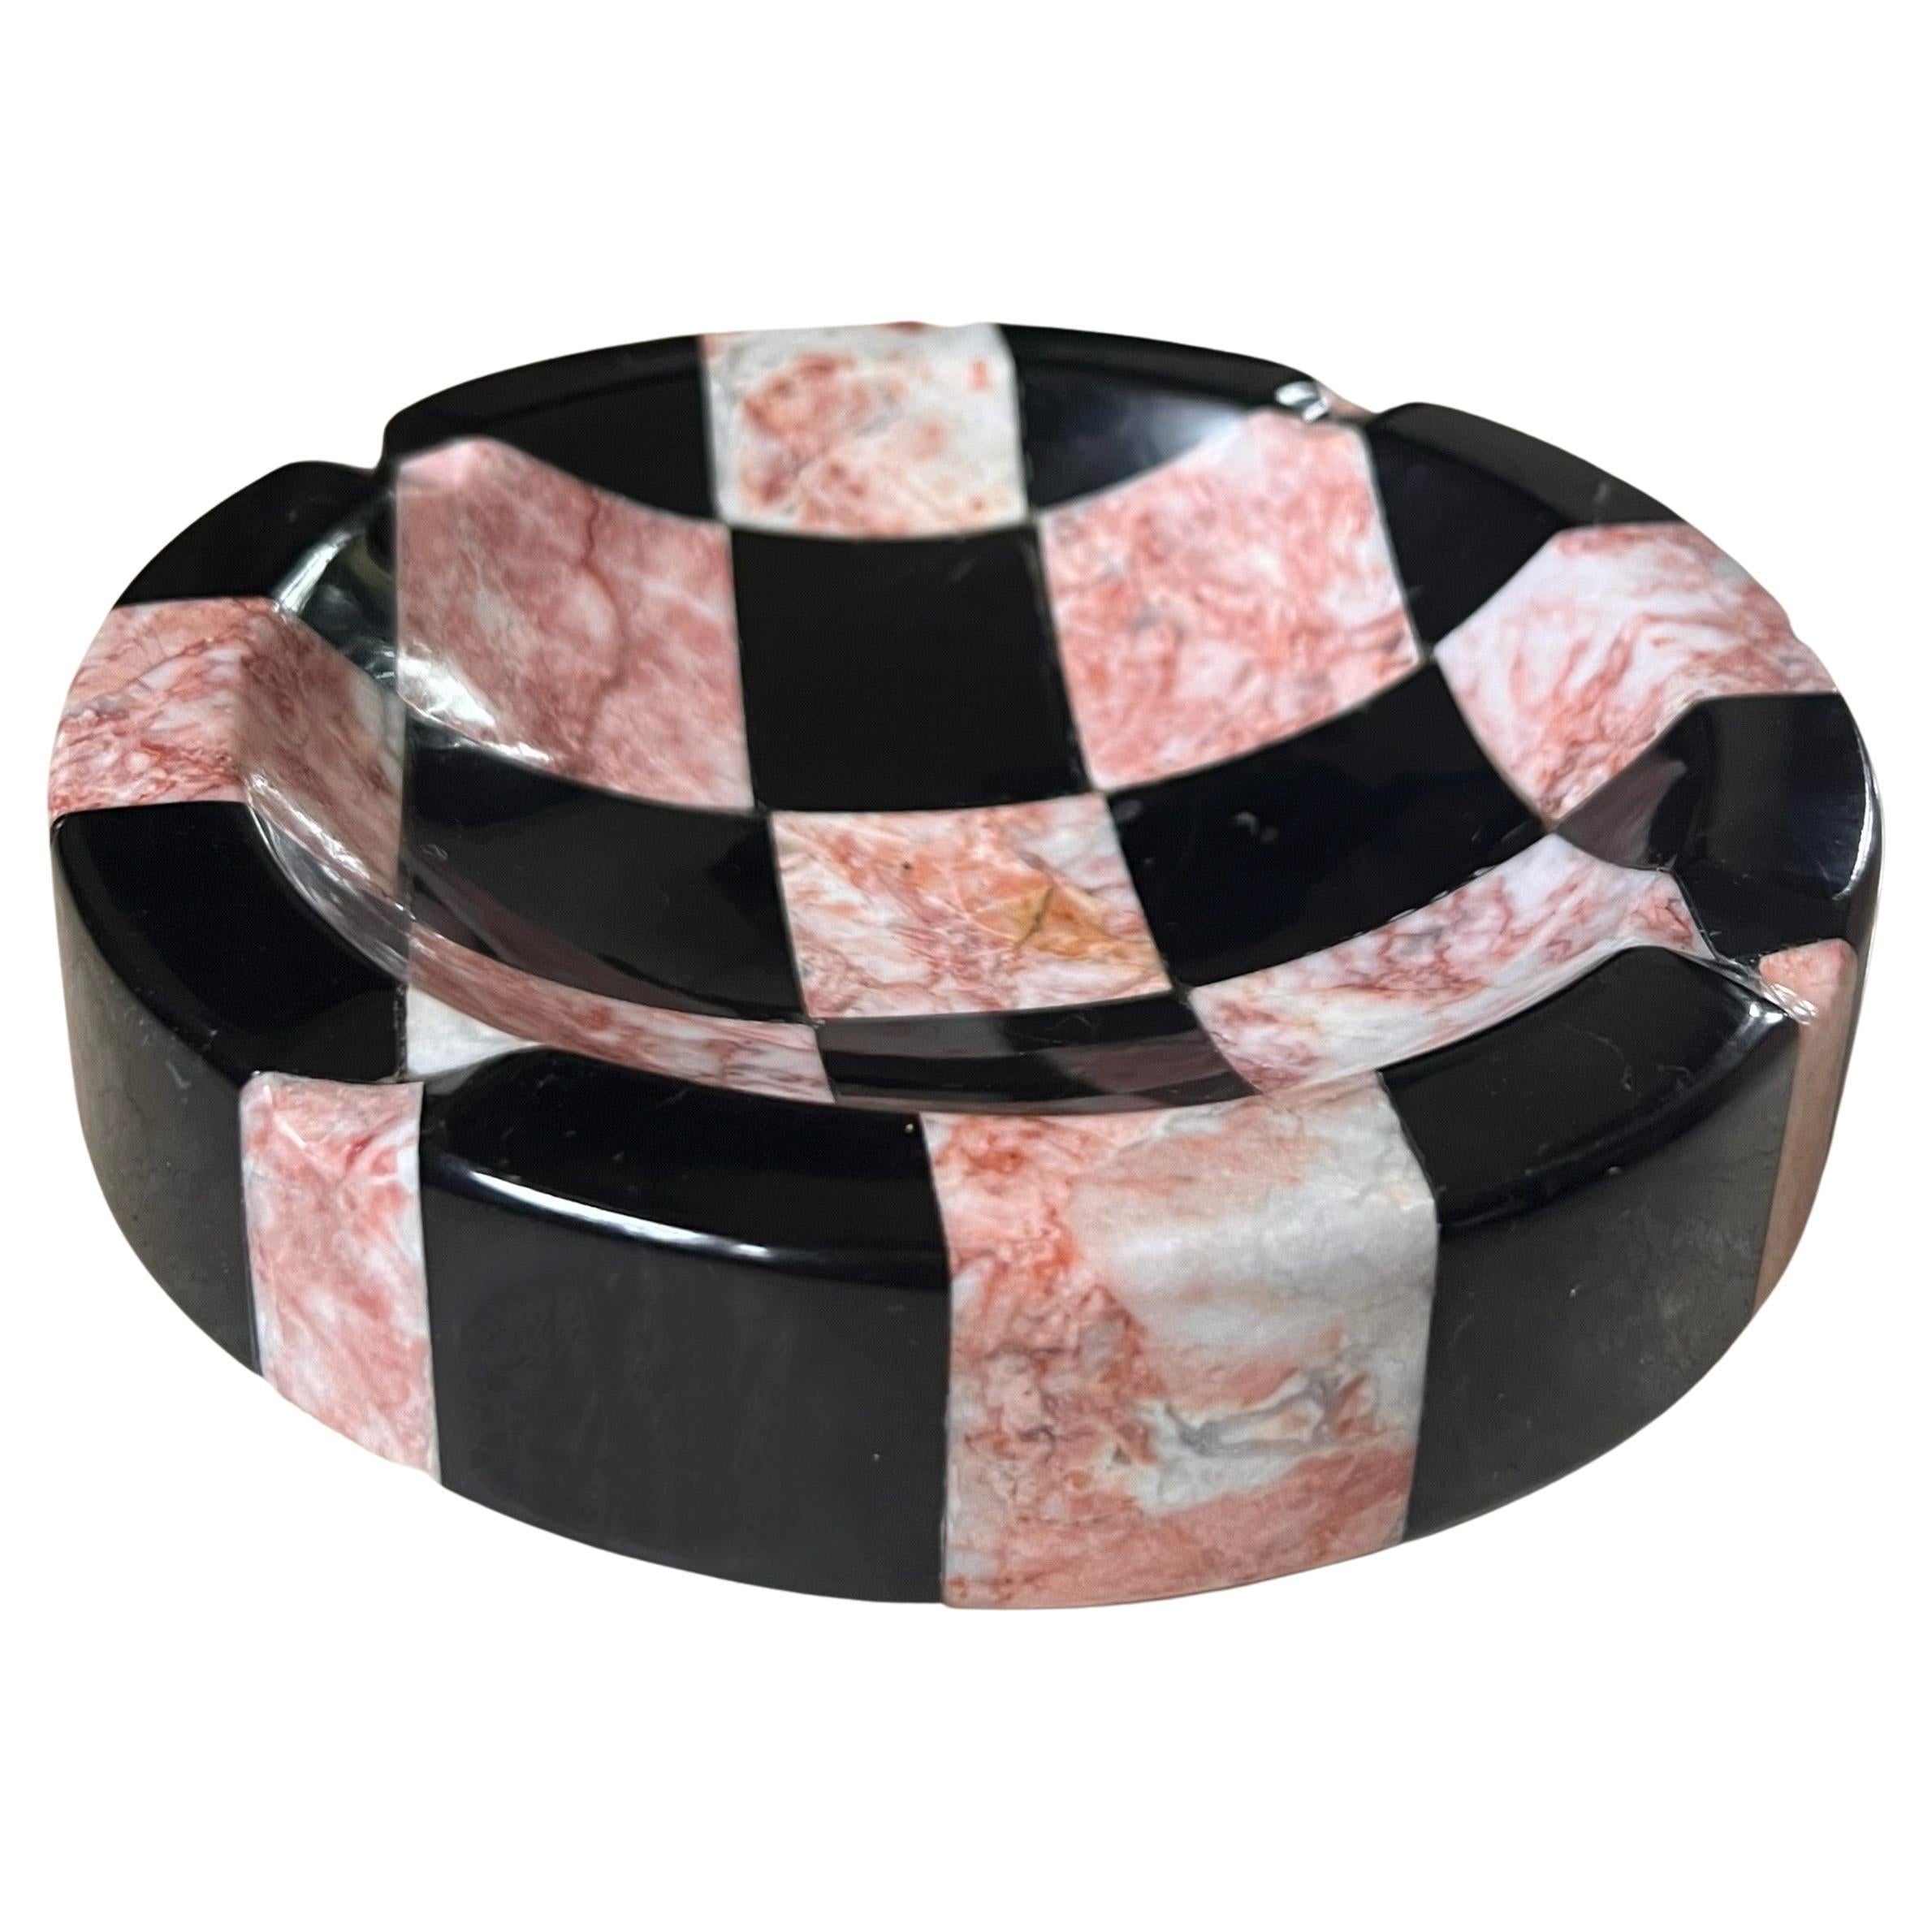 Pink and Black Checkered Marble Ashtray, Mid-20th Century